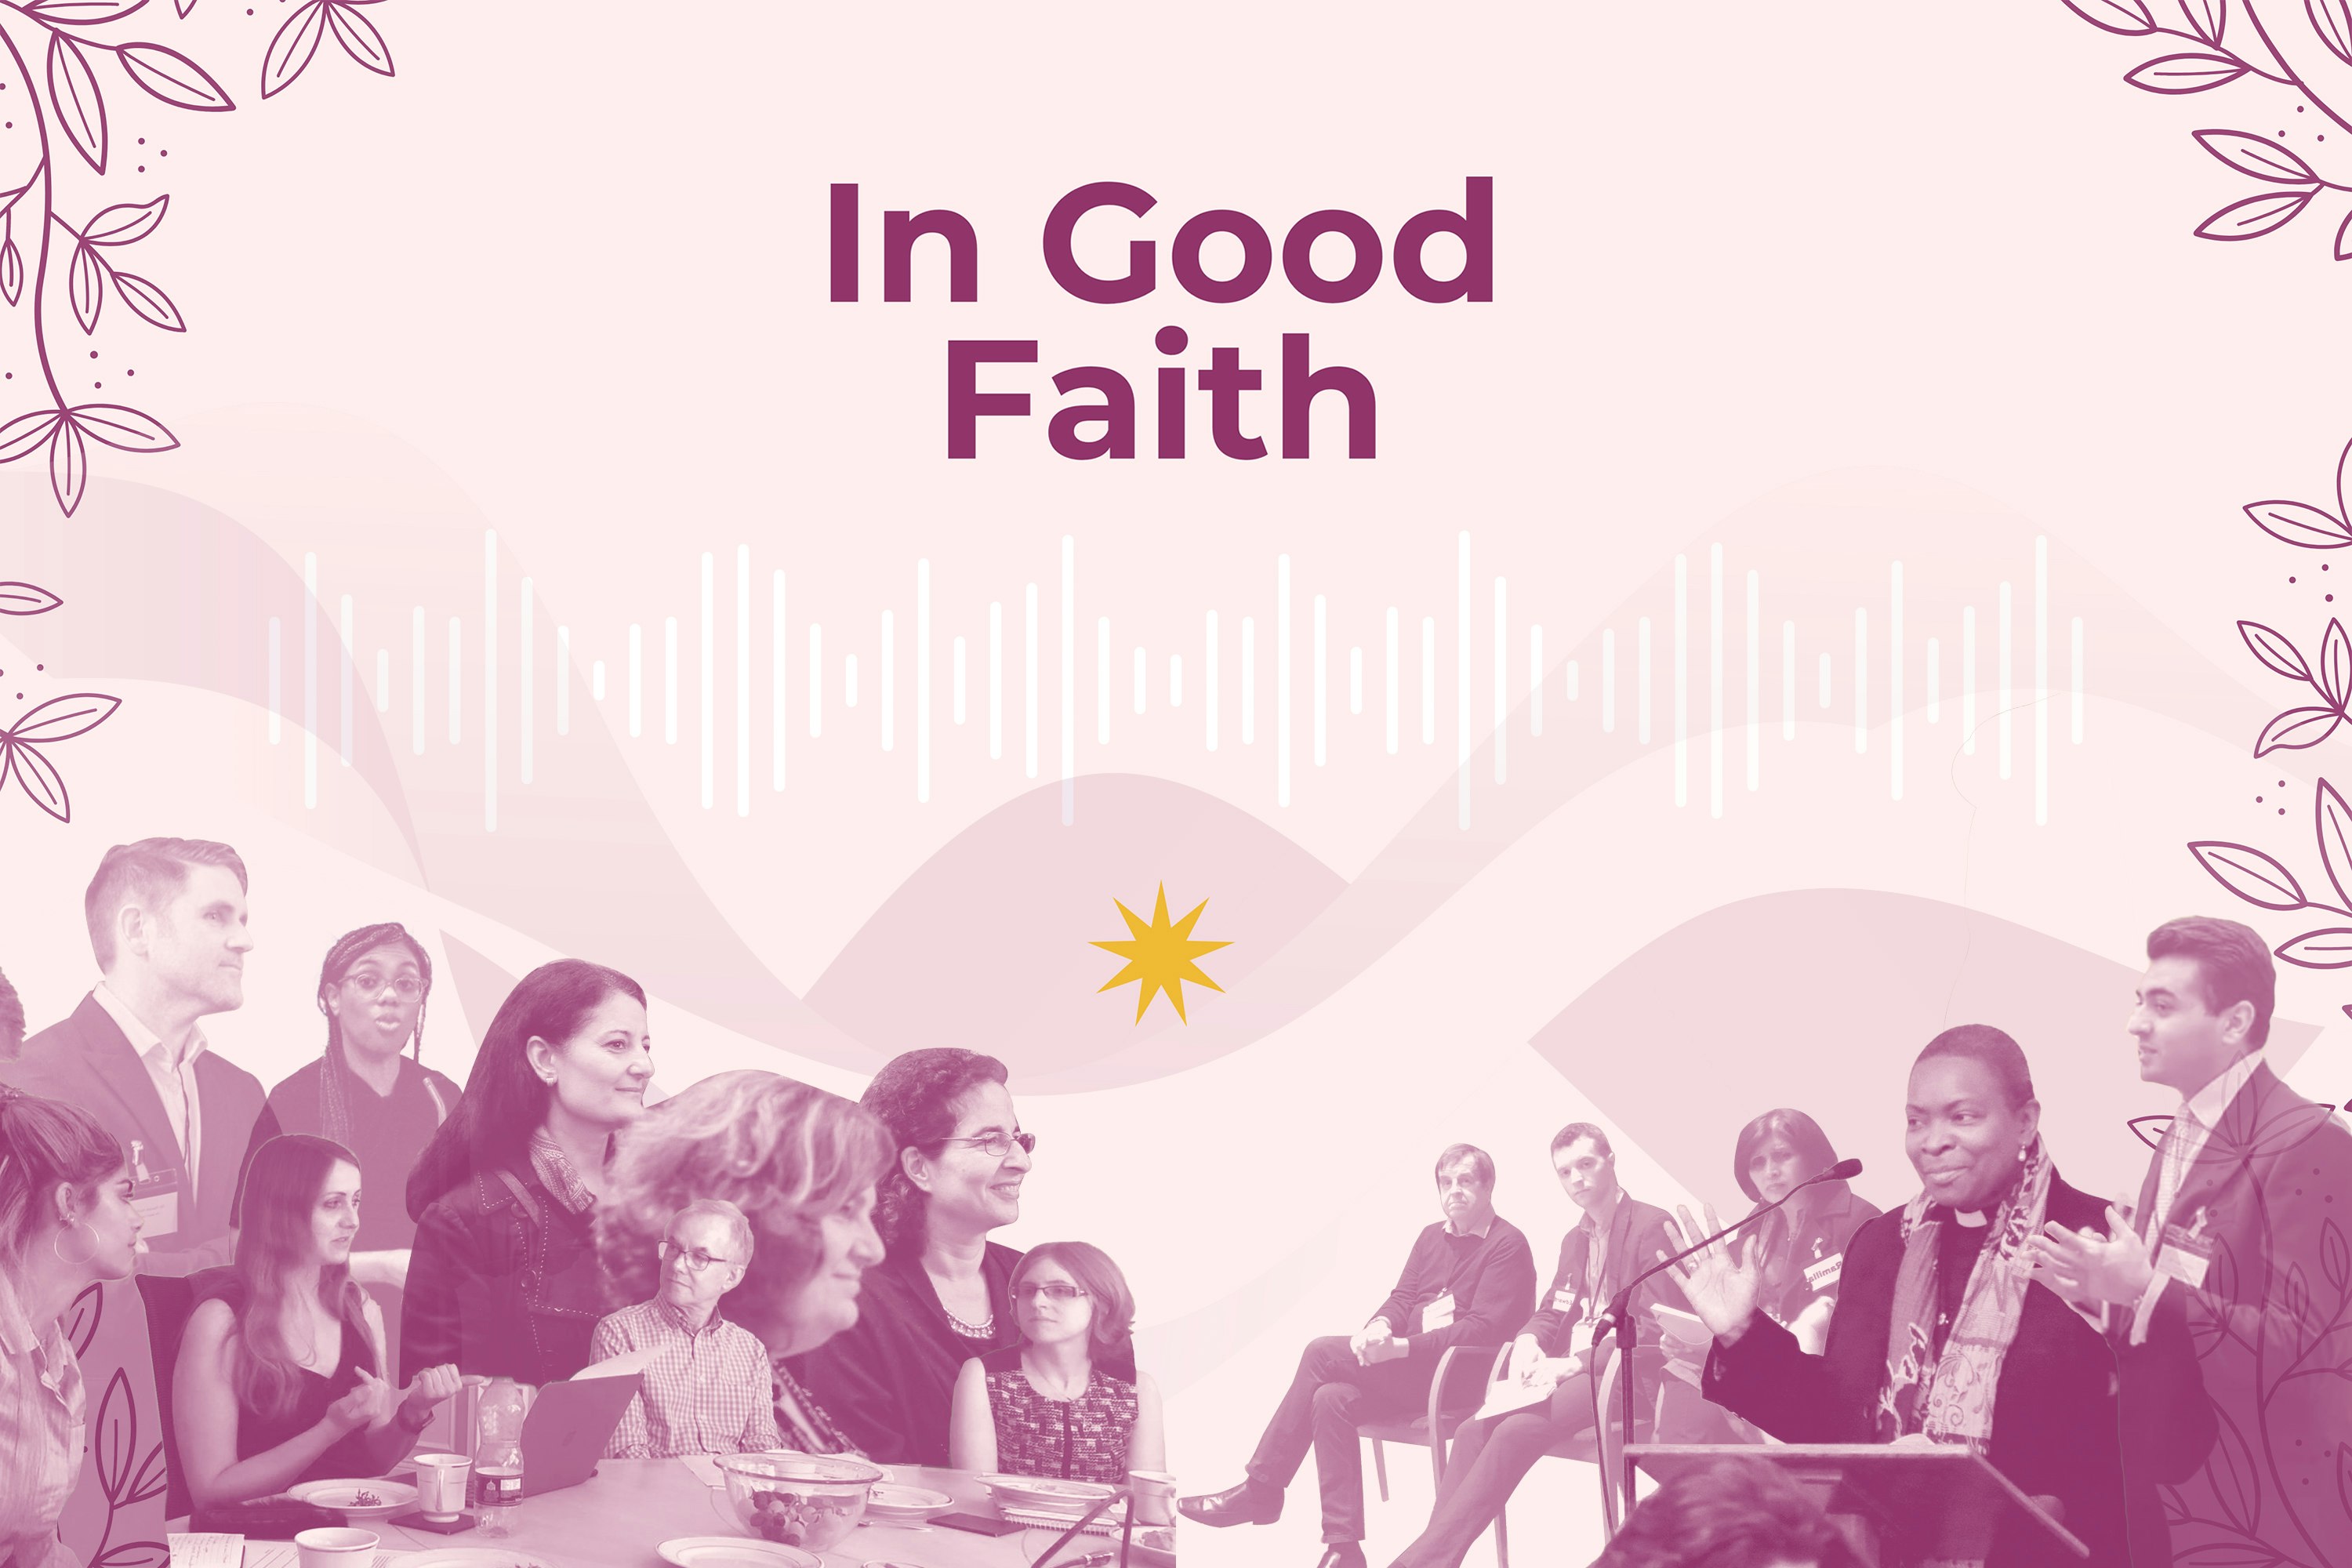 United Kingdom: New podcast explores relationship between religion and media